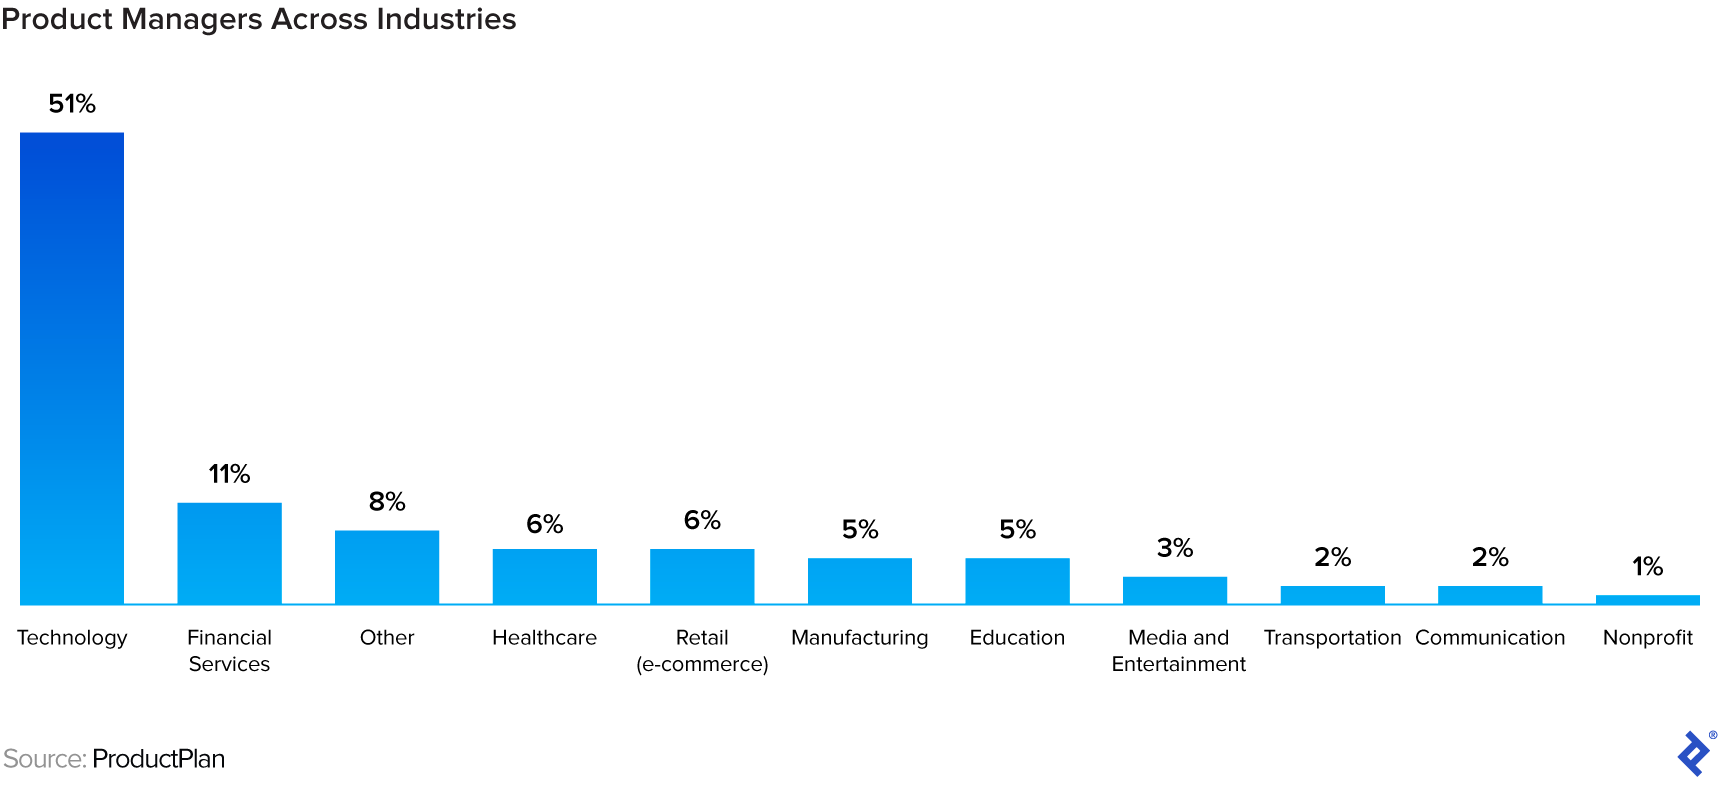 A bar chart showing the spread of product managers across industries. 51% work in technology, 11% in financial services, 8% in other industries, 6% in healthcare, 6% in retail, 5% in manufacturing, 5% in education, 3% in media and entertainment, 2% in transportation, 2% in communication, and 1% in nonprofit.